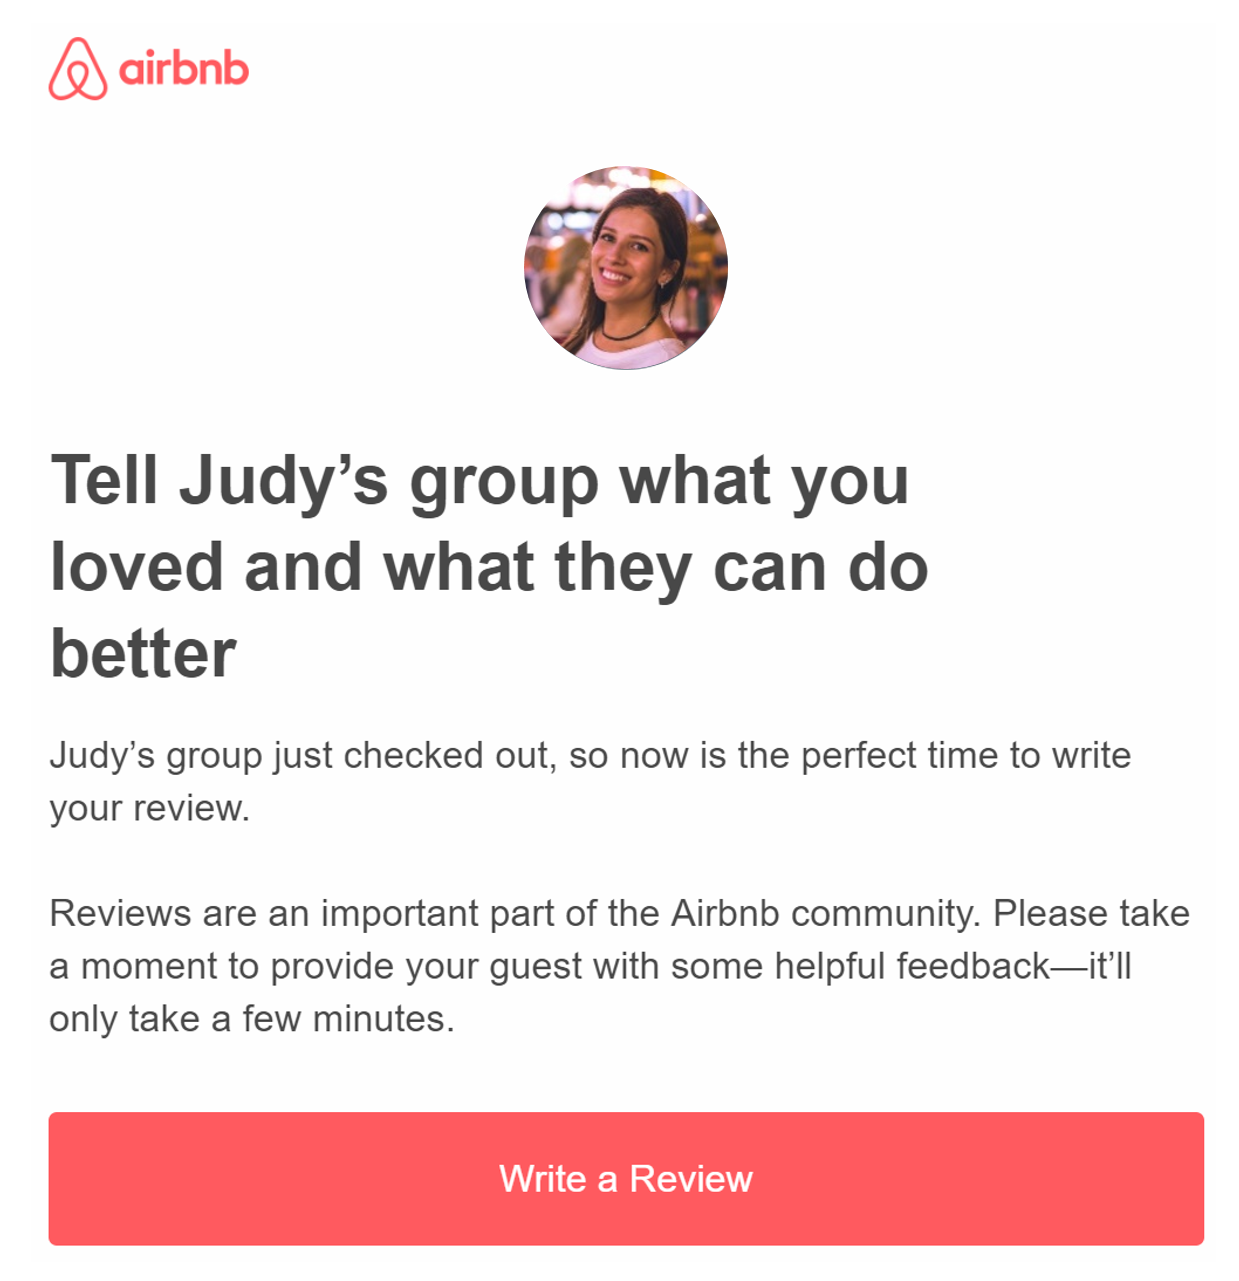 Airbnb uses customer feedback to boost retention